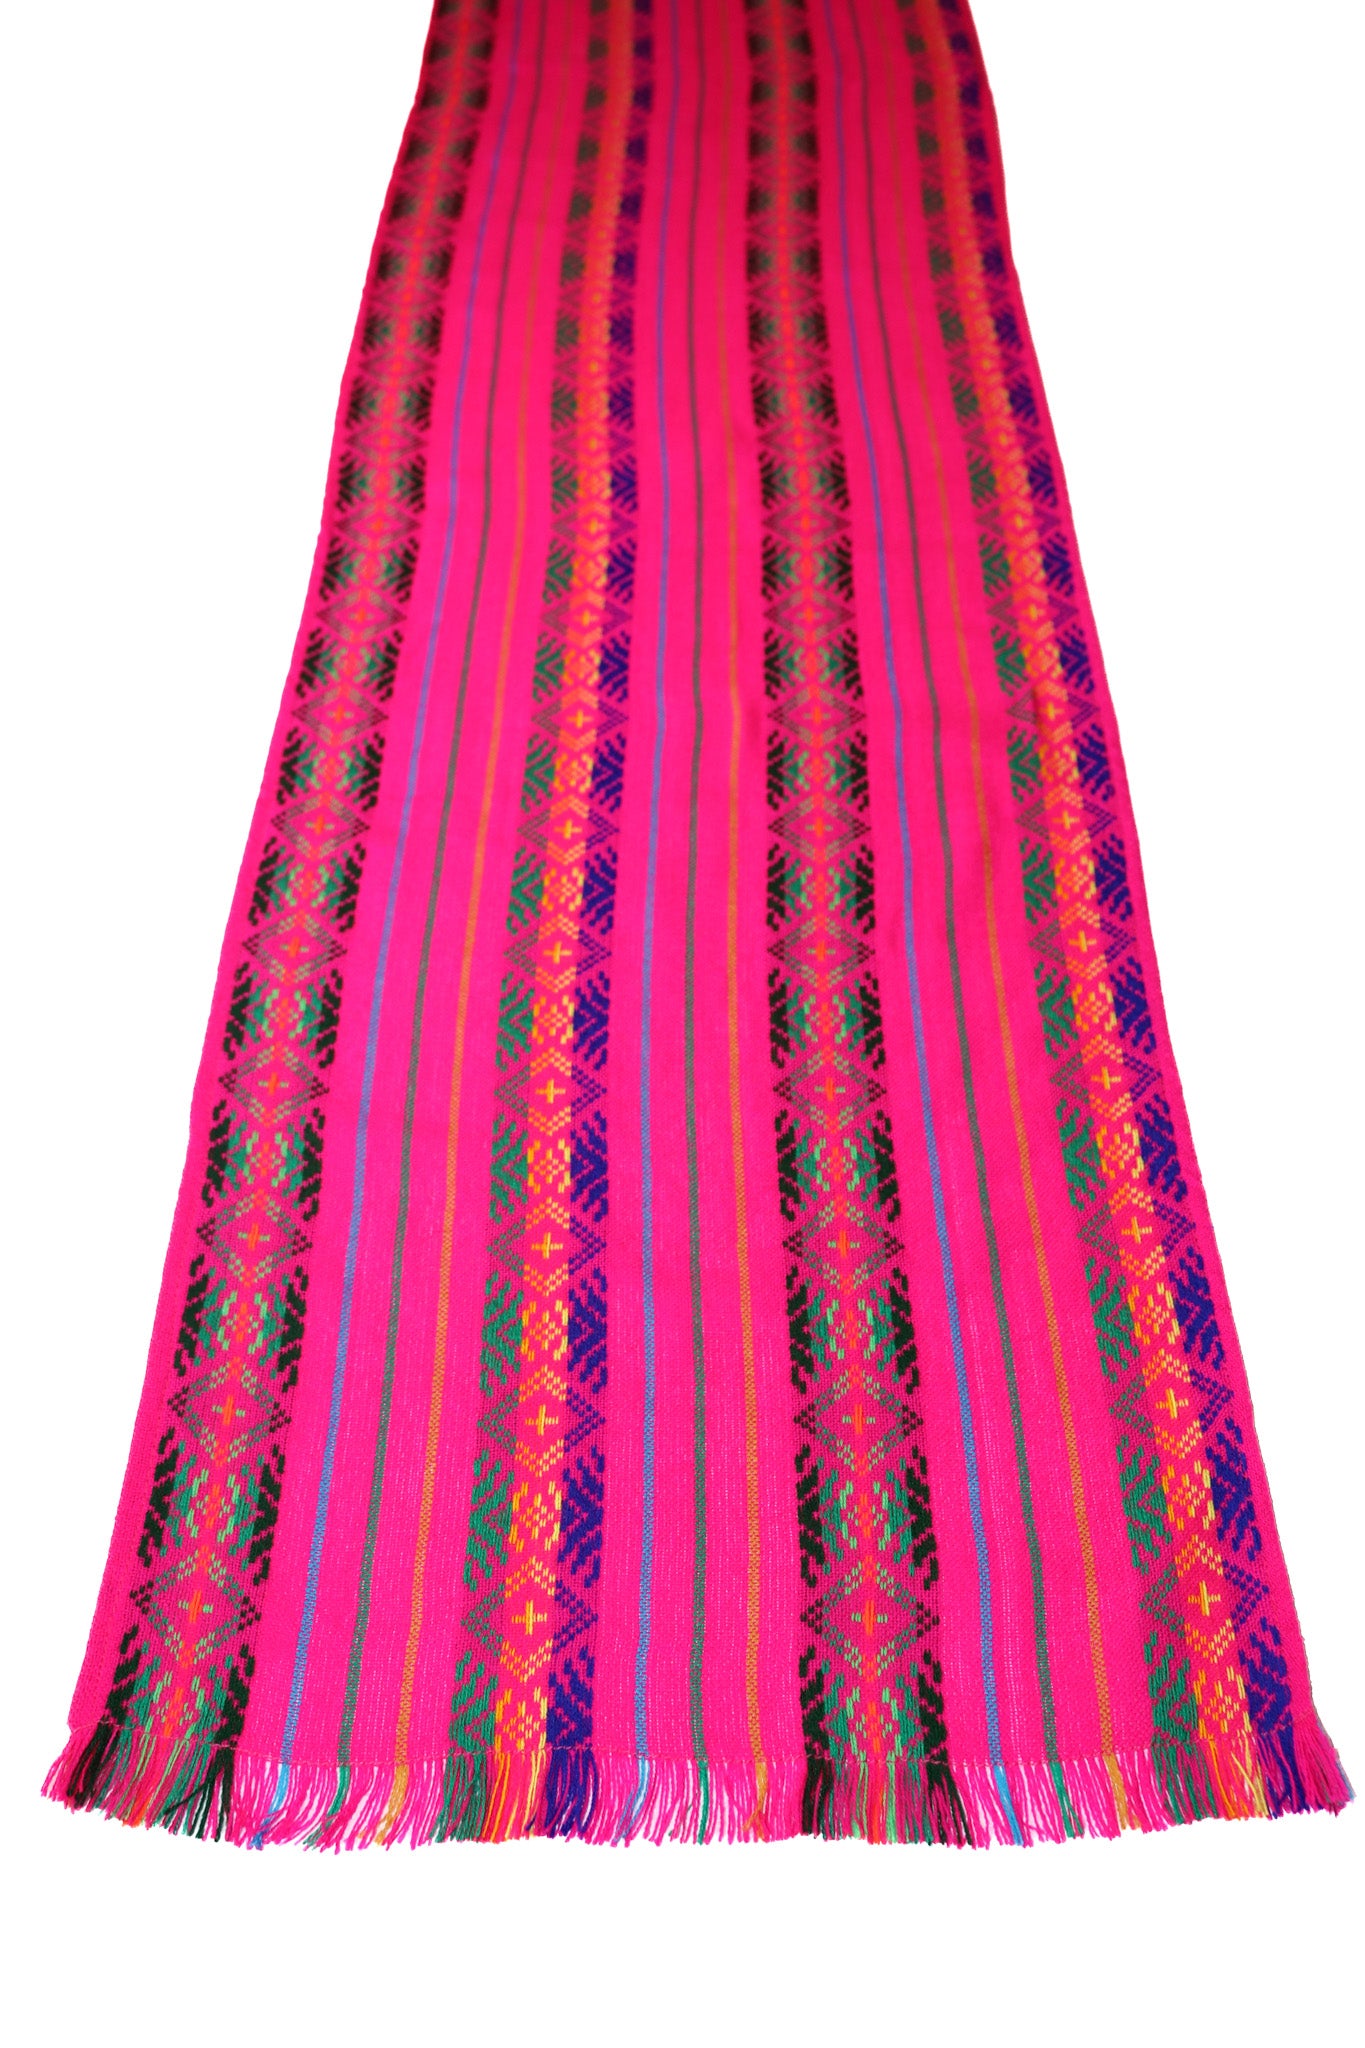 Mexican Fabric Table Runner or Tablecloth Hot pink